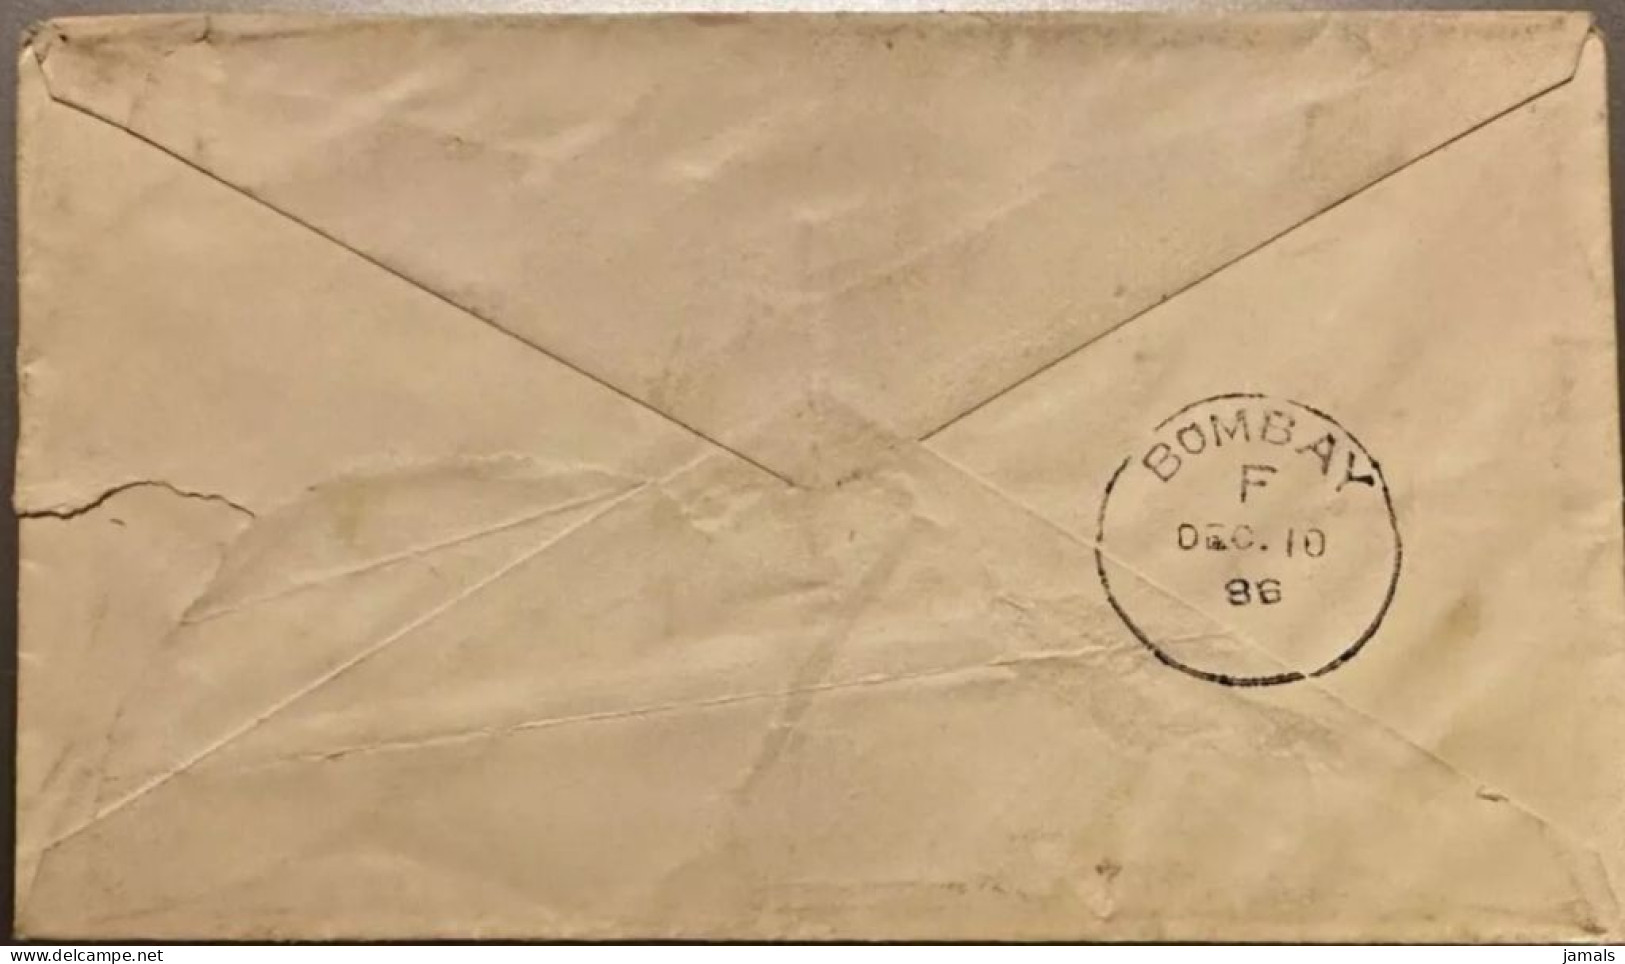 Br India Queen Victoria Postal Stationary Envelope, Madras Postmark As Scan - 1882-1901 Imperium